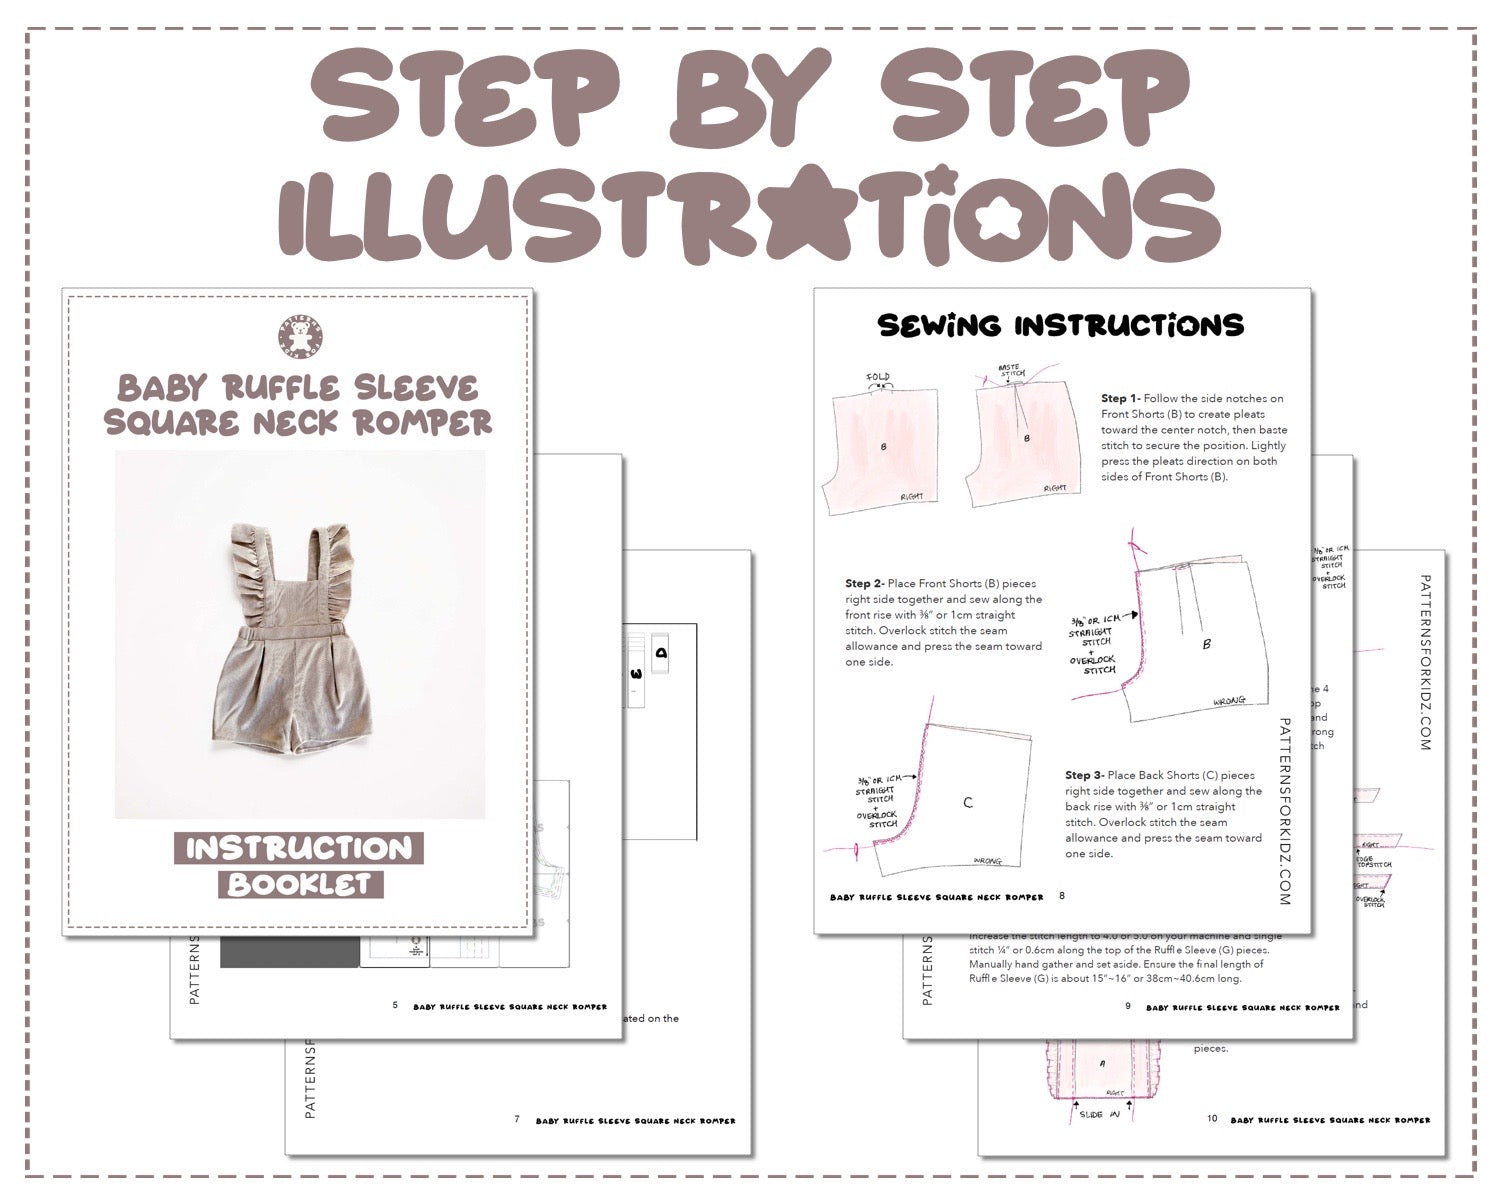 Baby Ruffle Sleeve Square Neck Romper  sewing pattern step by step illustrations.